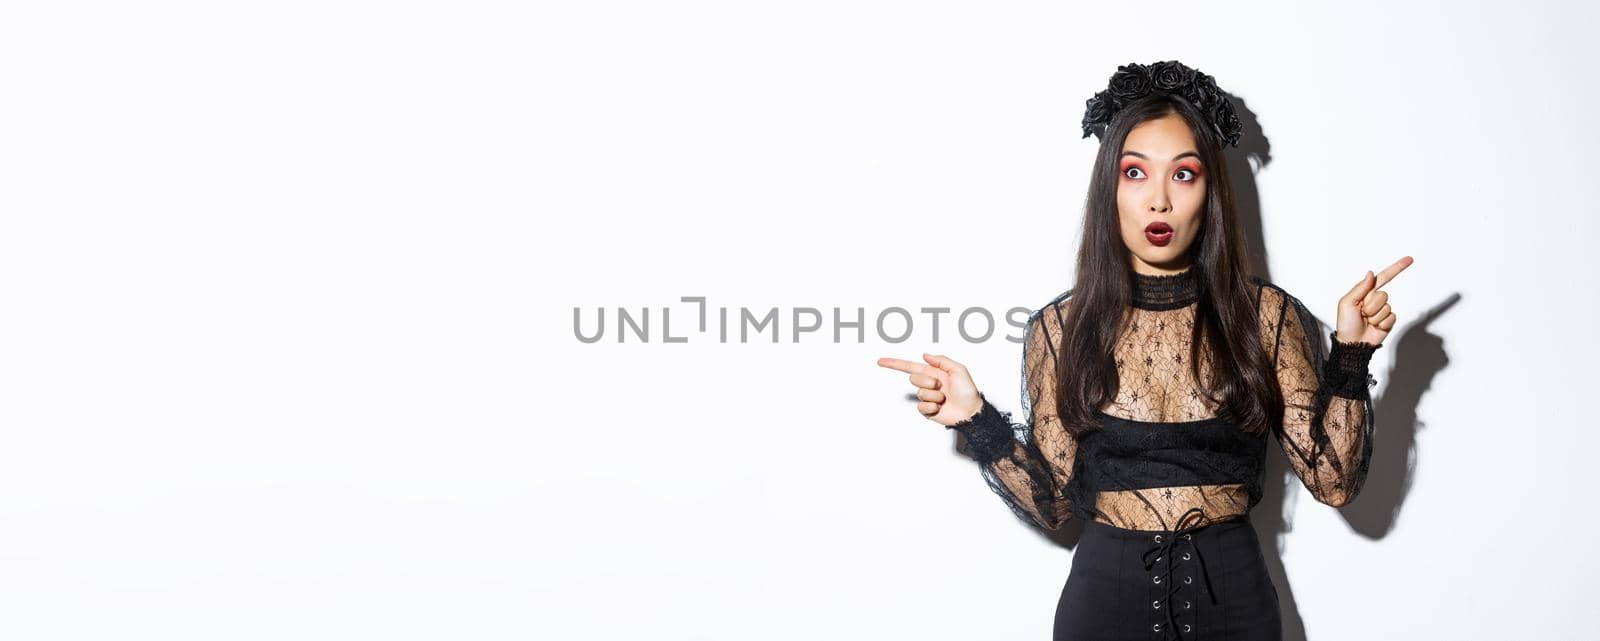 Amazed and startled woman in witch costume looking impressed, pointing fingers sideways but stare left, open mouth wondered, standing in black lace dress and wreath, white background.